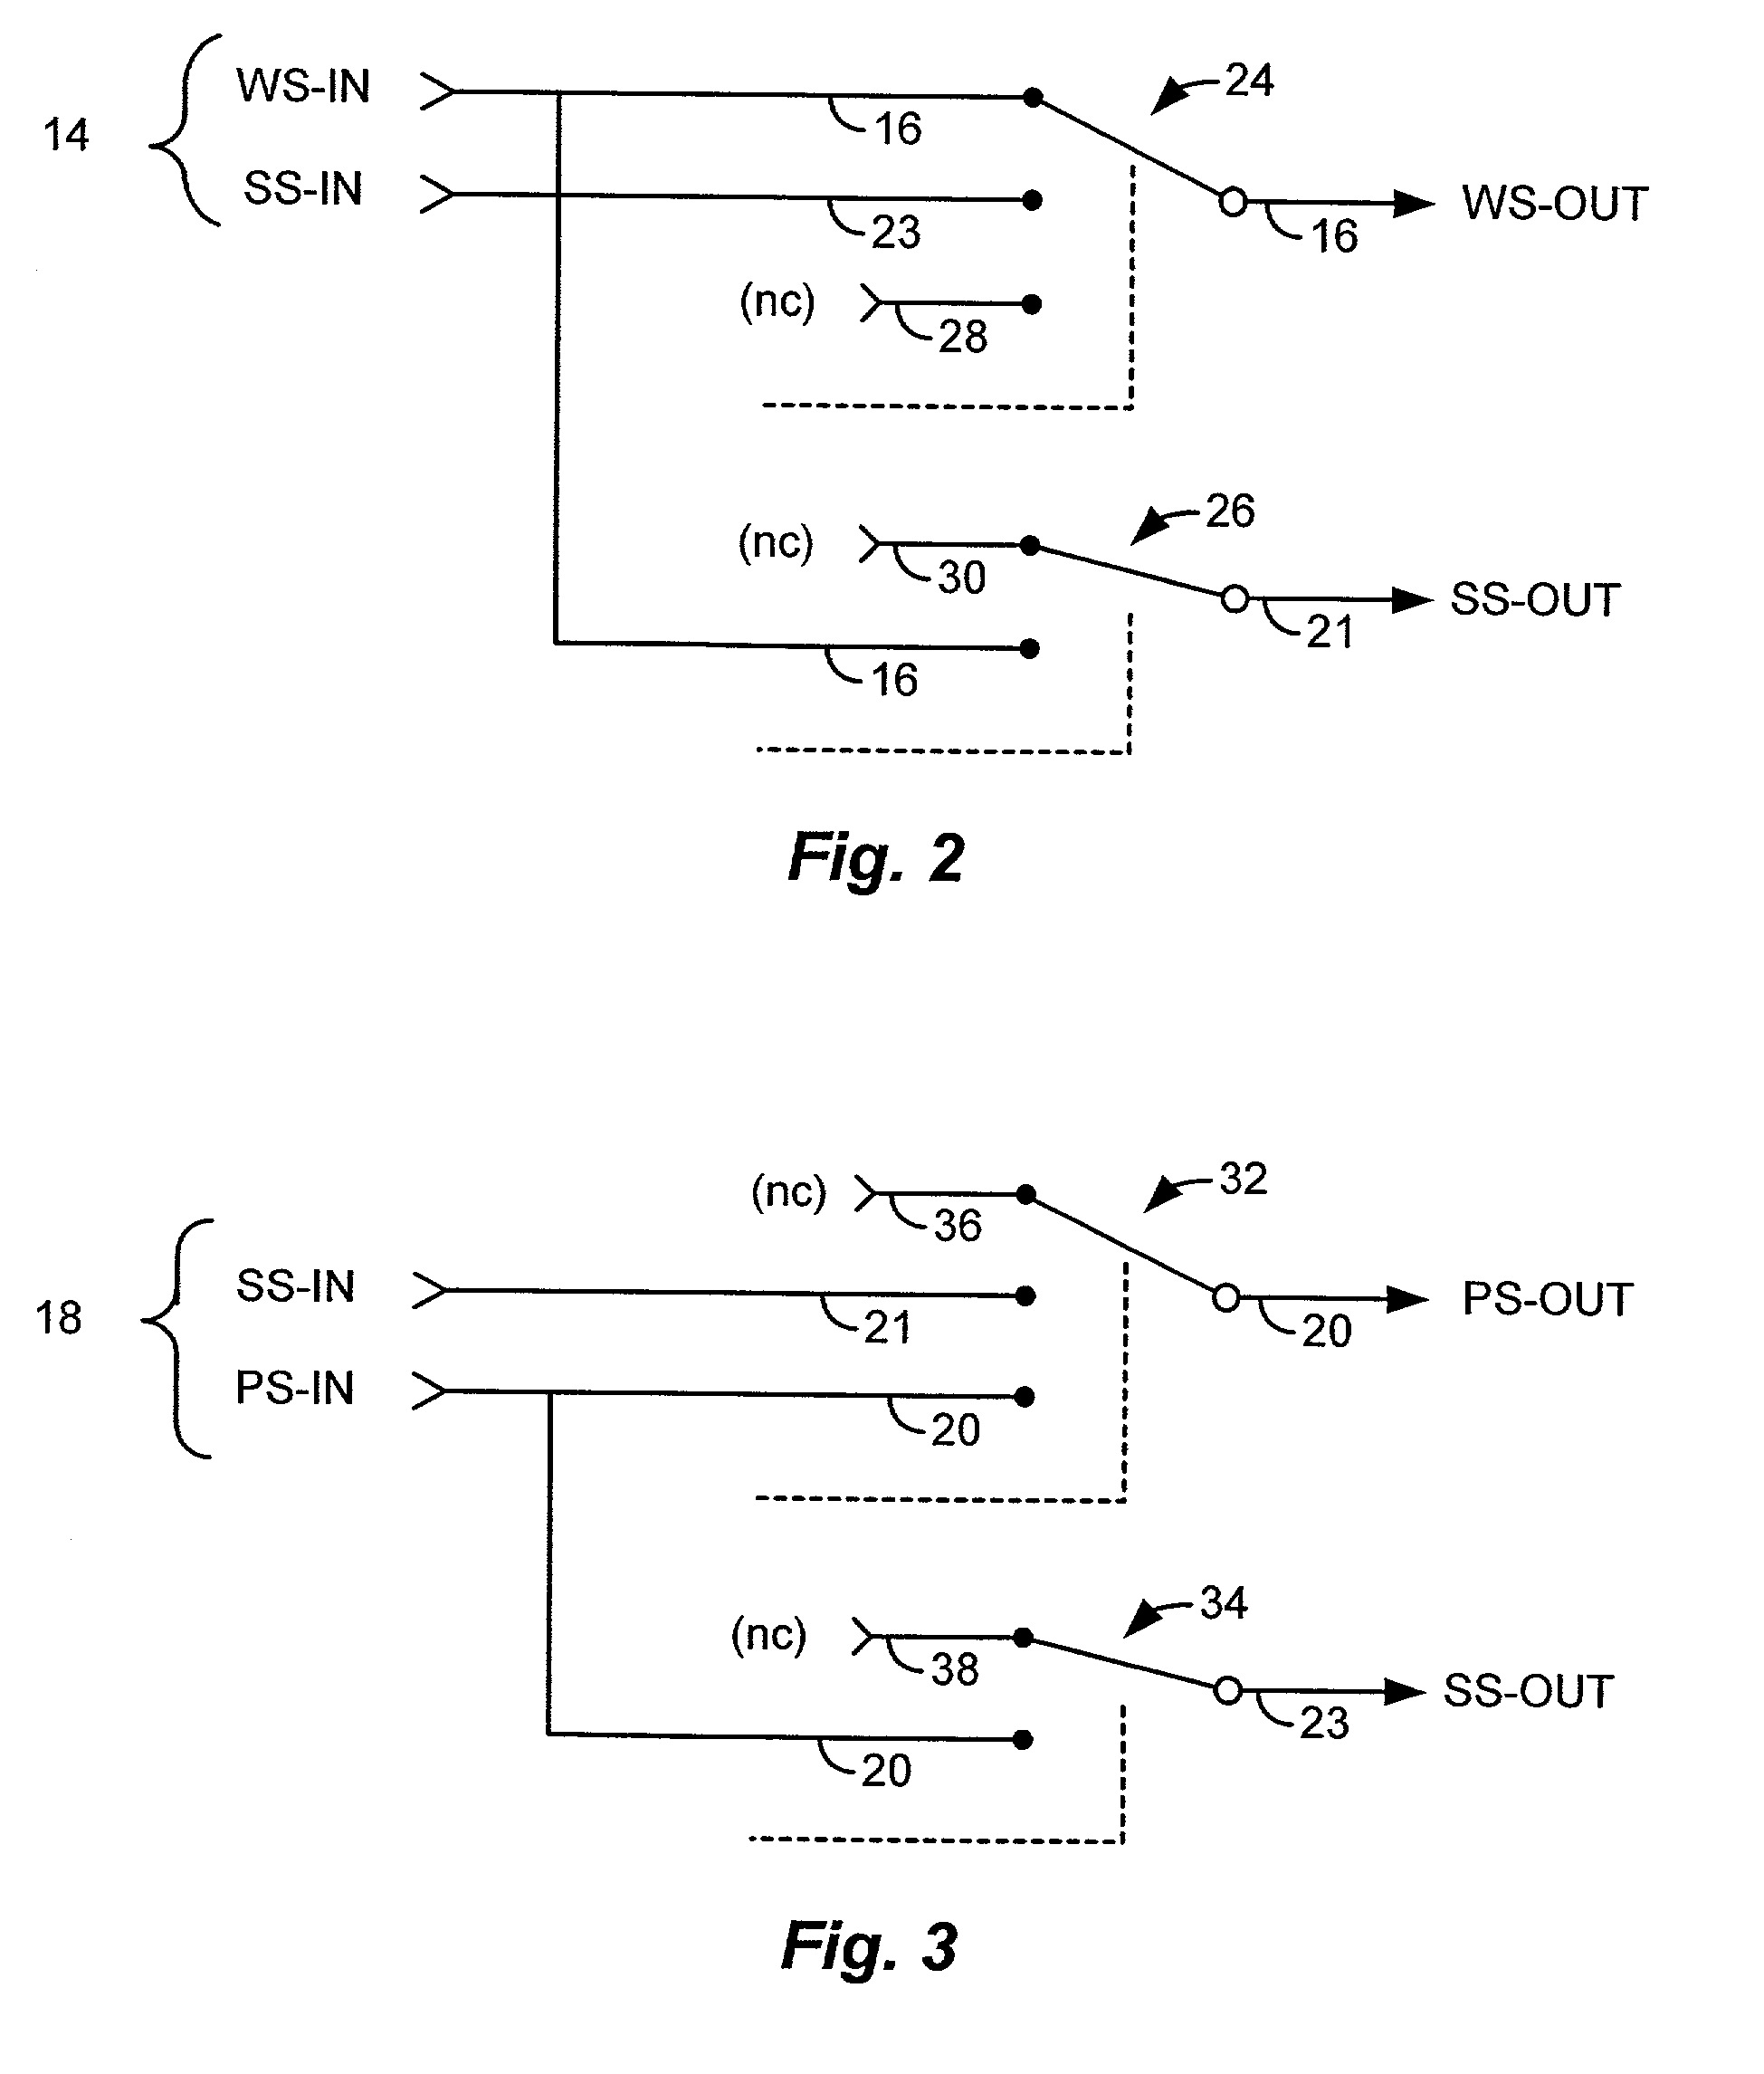 Scaleable line-based protection for connection oriented communications protocols